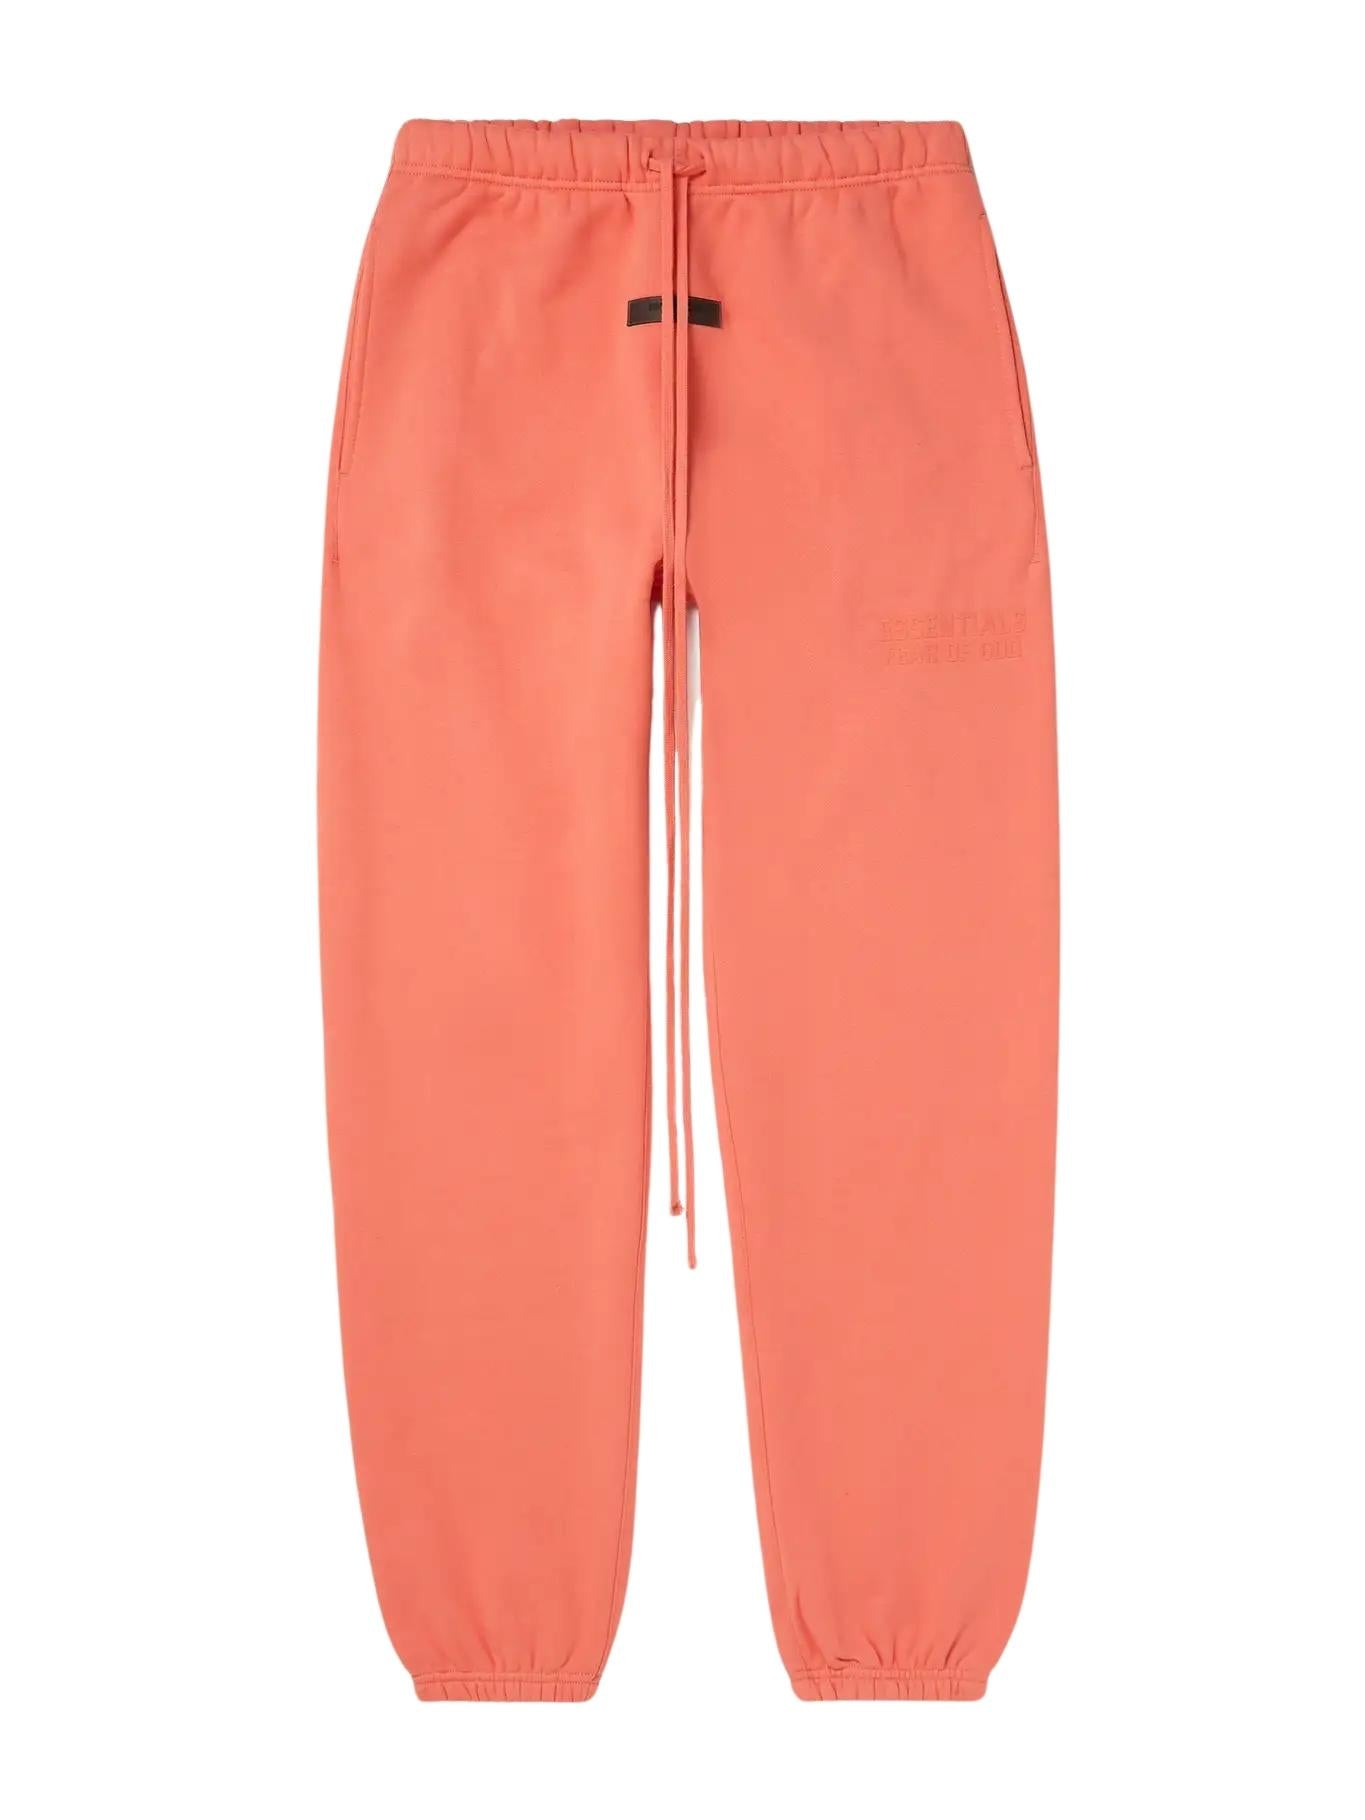 FEAR OF GOD ESSENTIALS CORAL TRACKSUIT (FW22) - Hype Locker UK